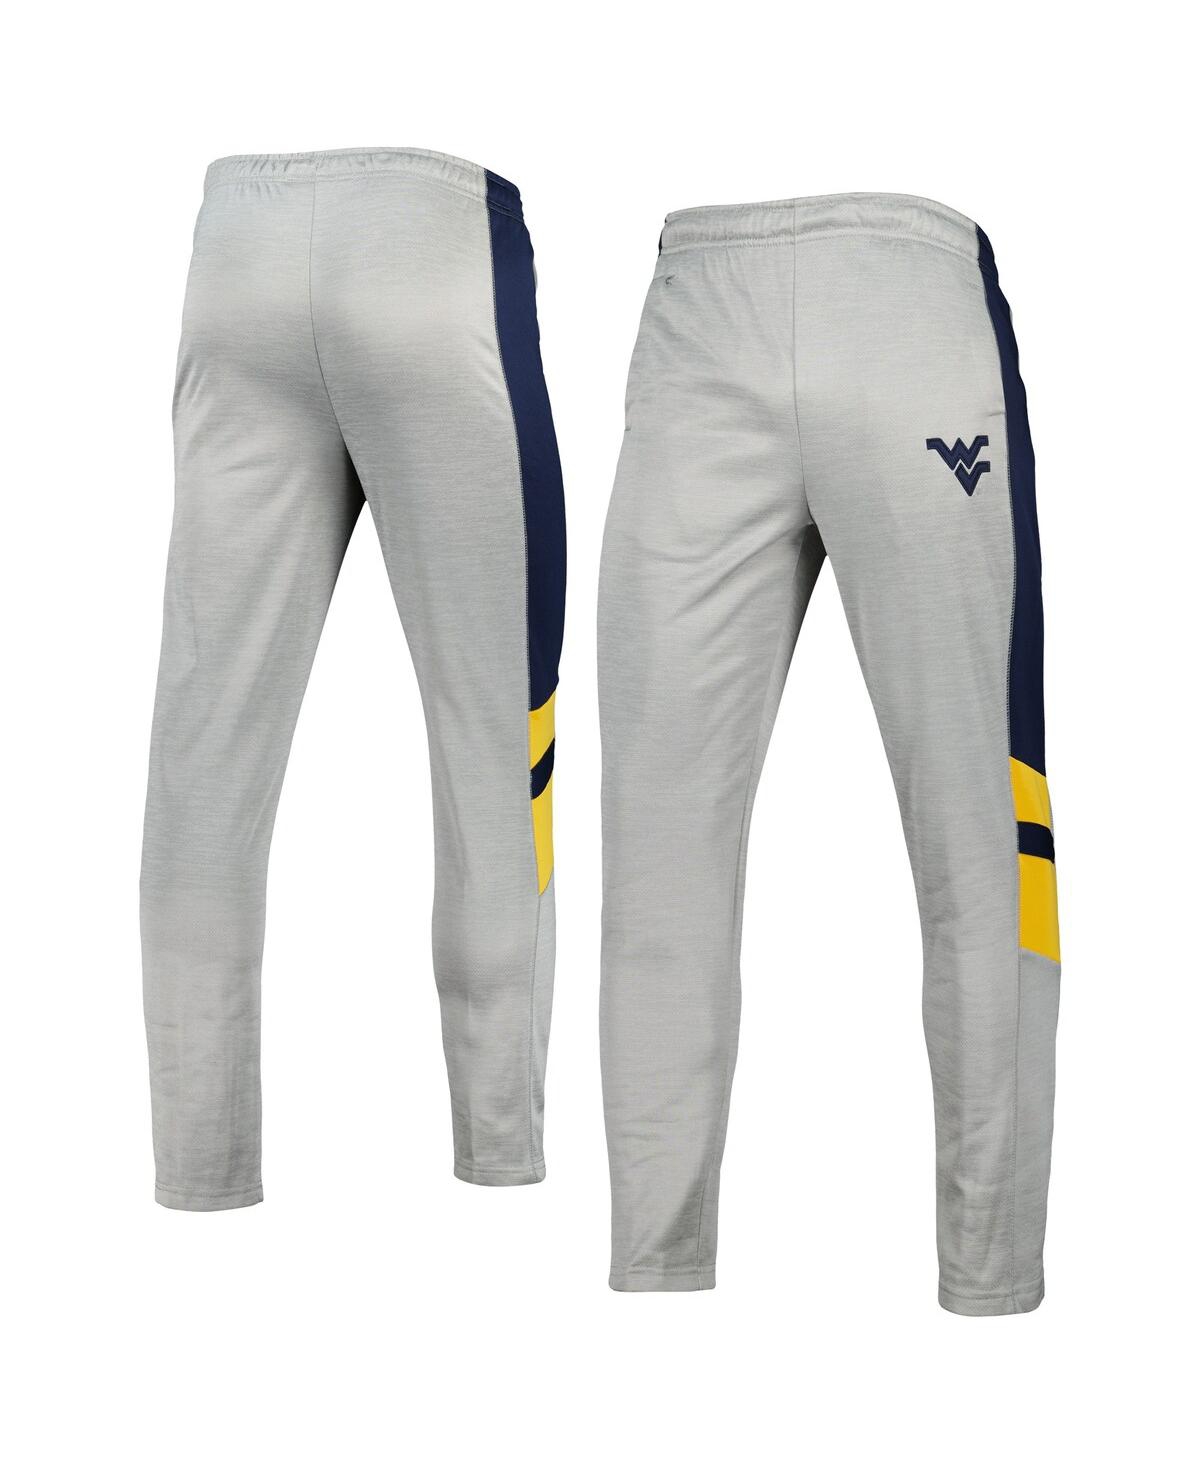 Men's Colosseum Heathered Gray and Navy West Virginia Mountaineers Bushwood Pants - Heathered Gray, Navy